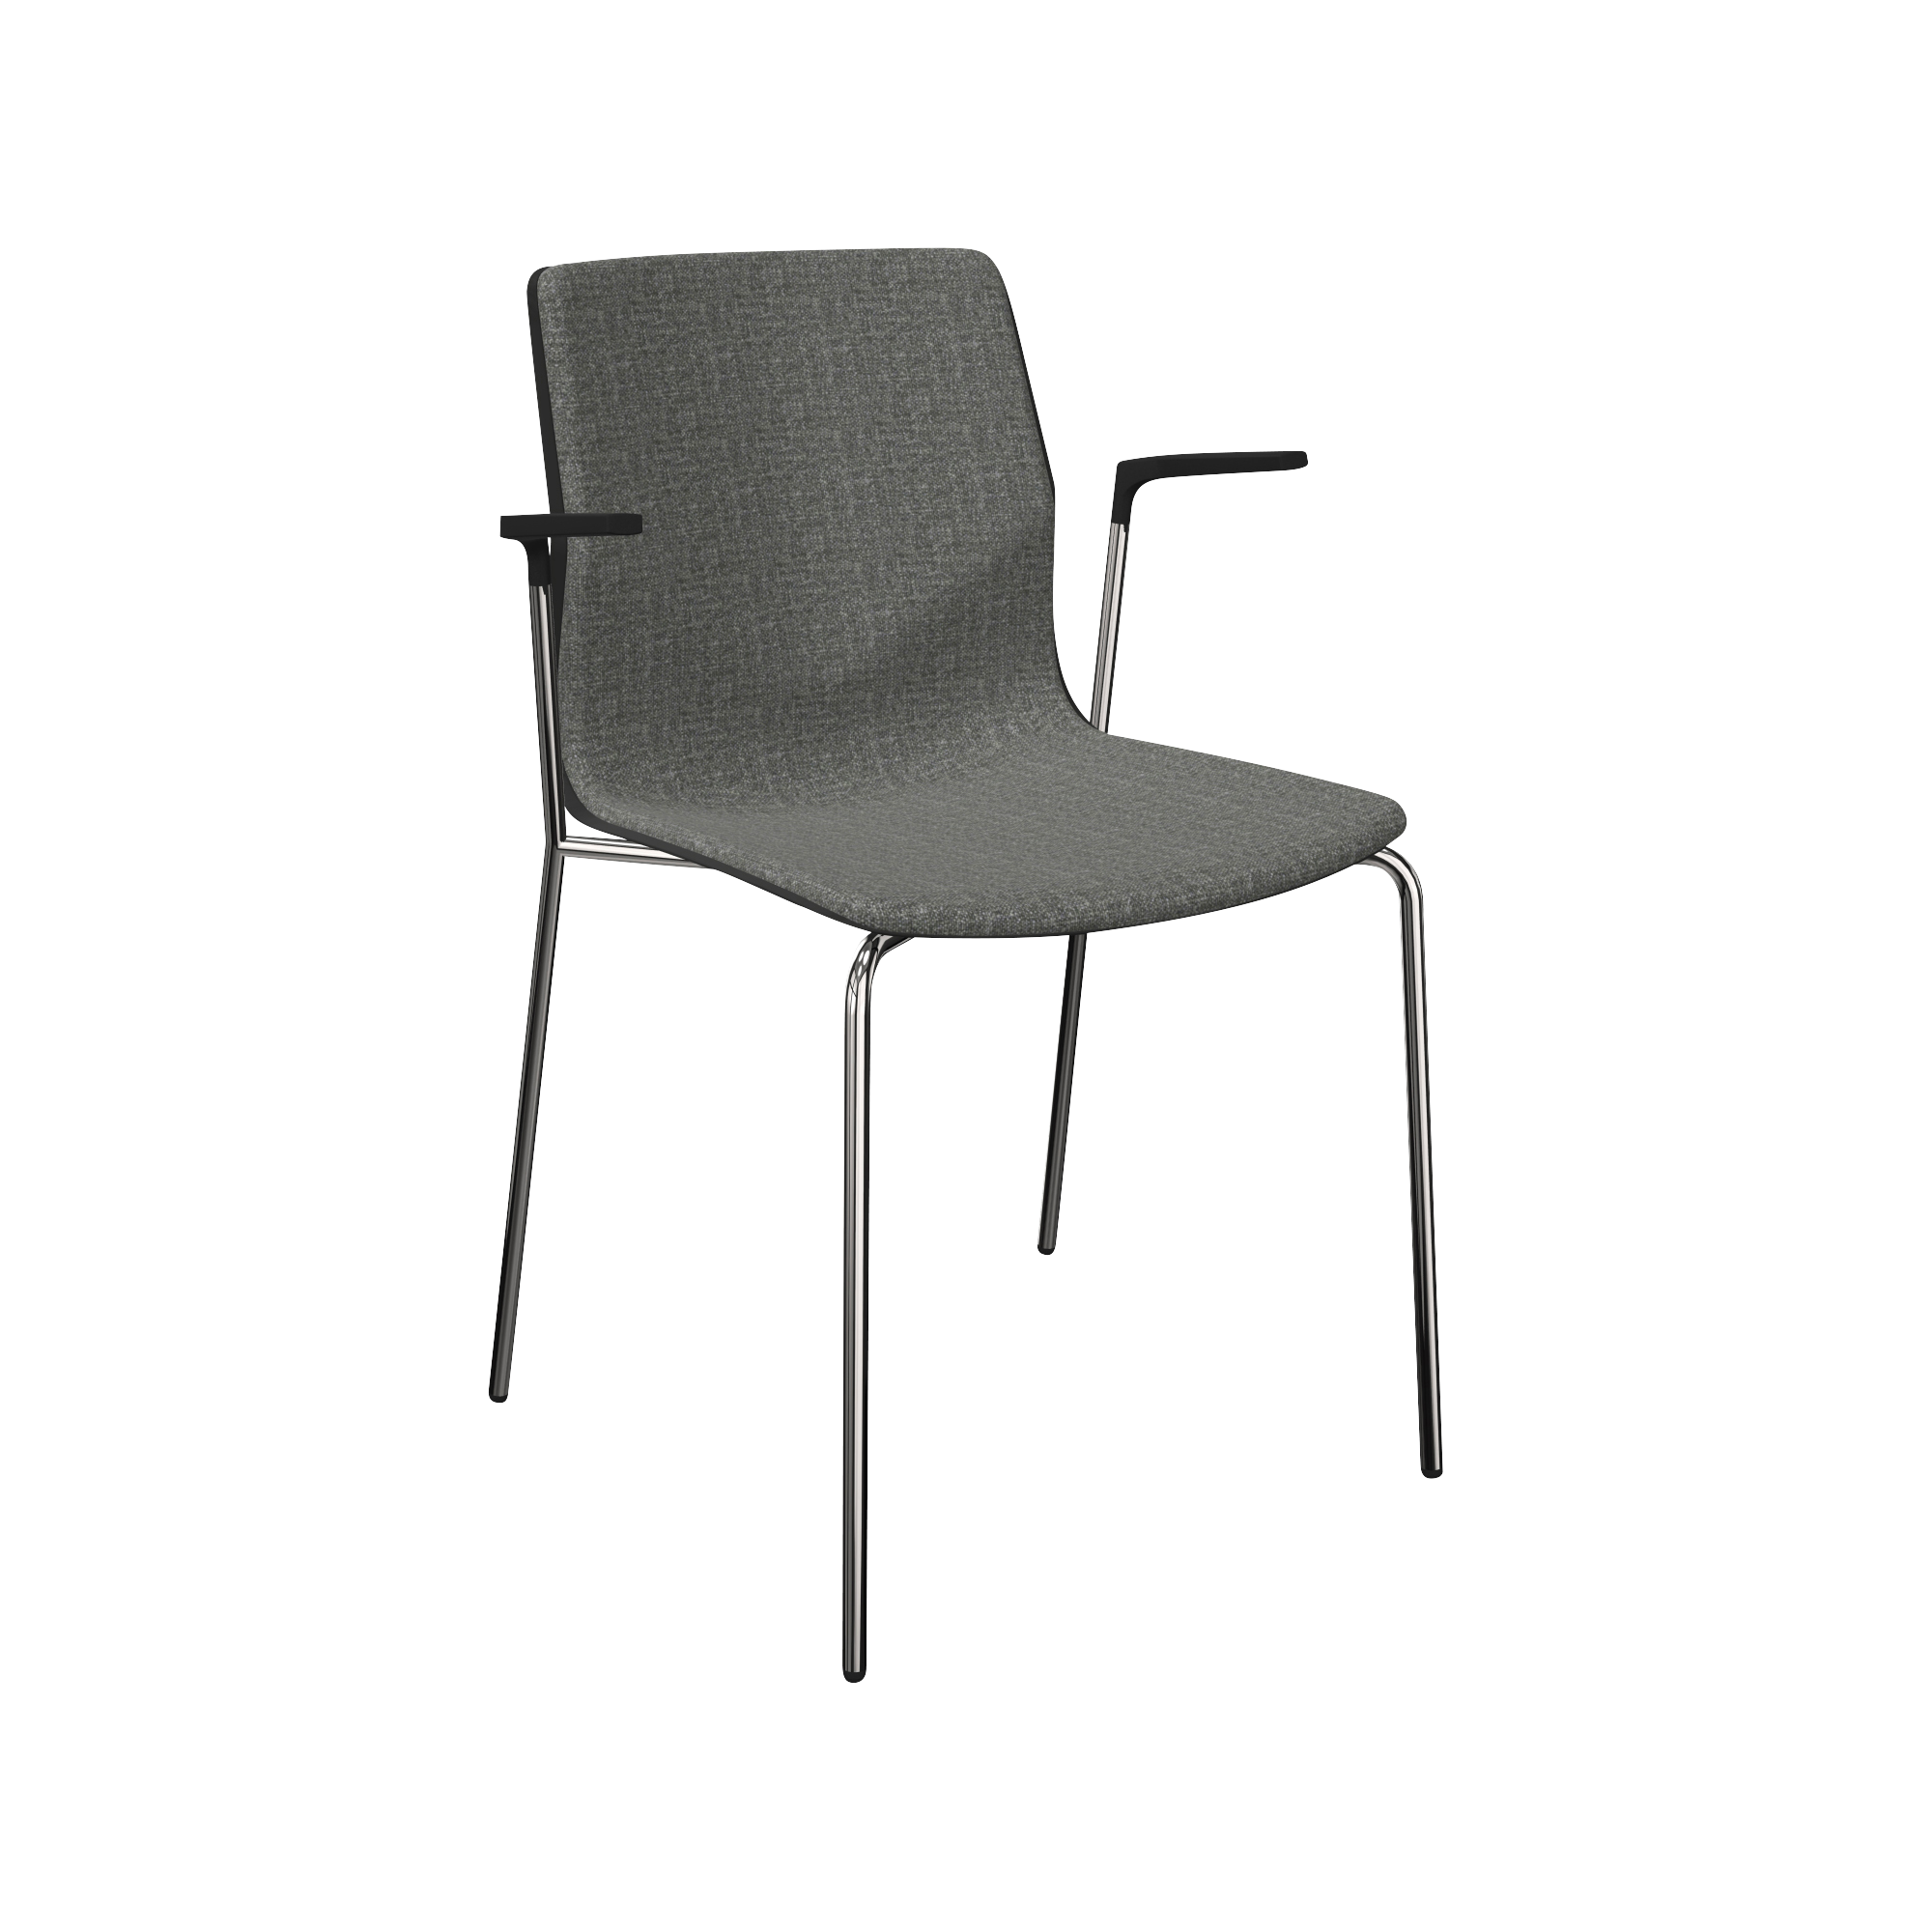 A grey chair with a chrome frame and legs